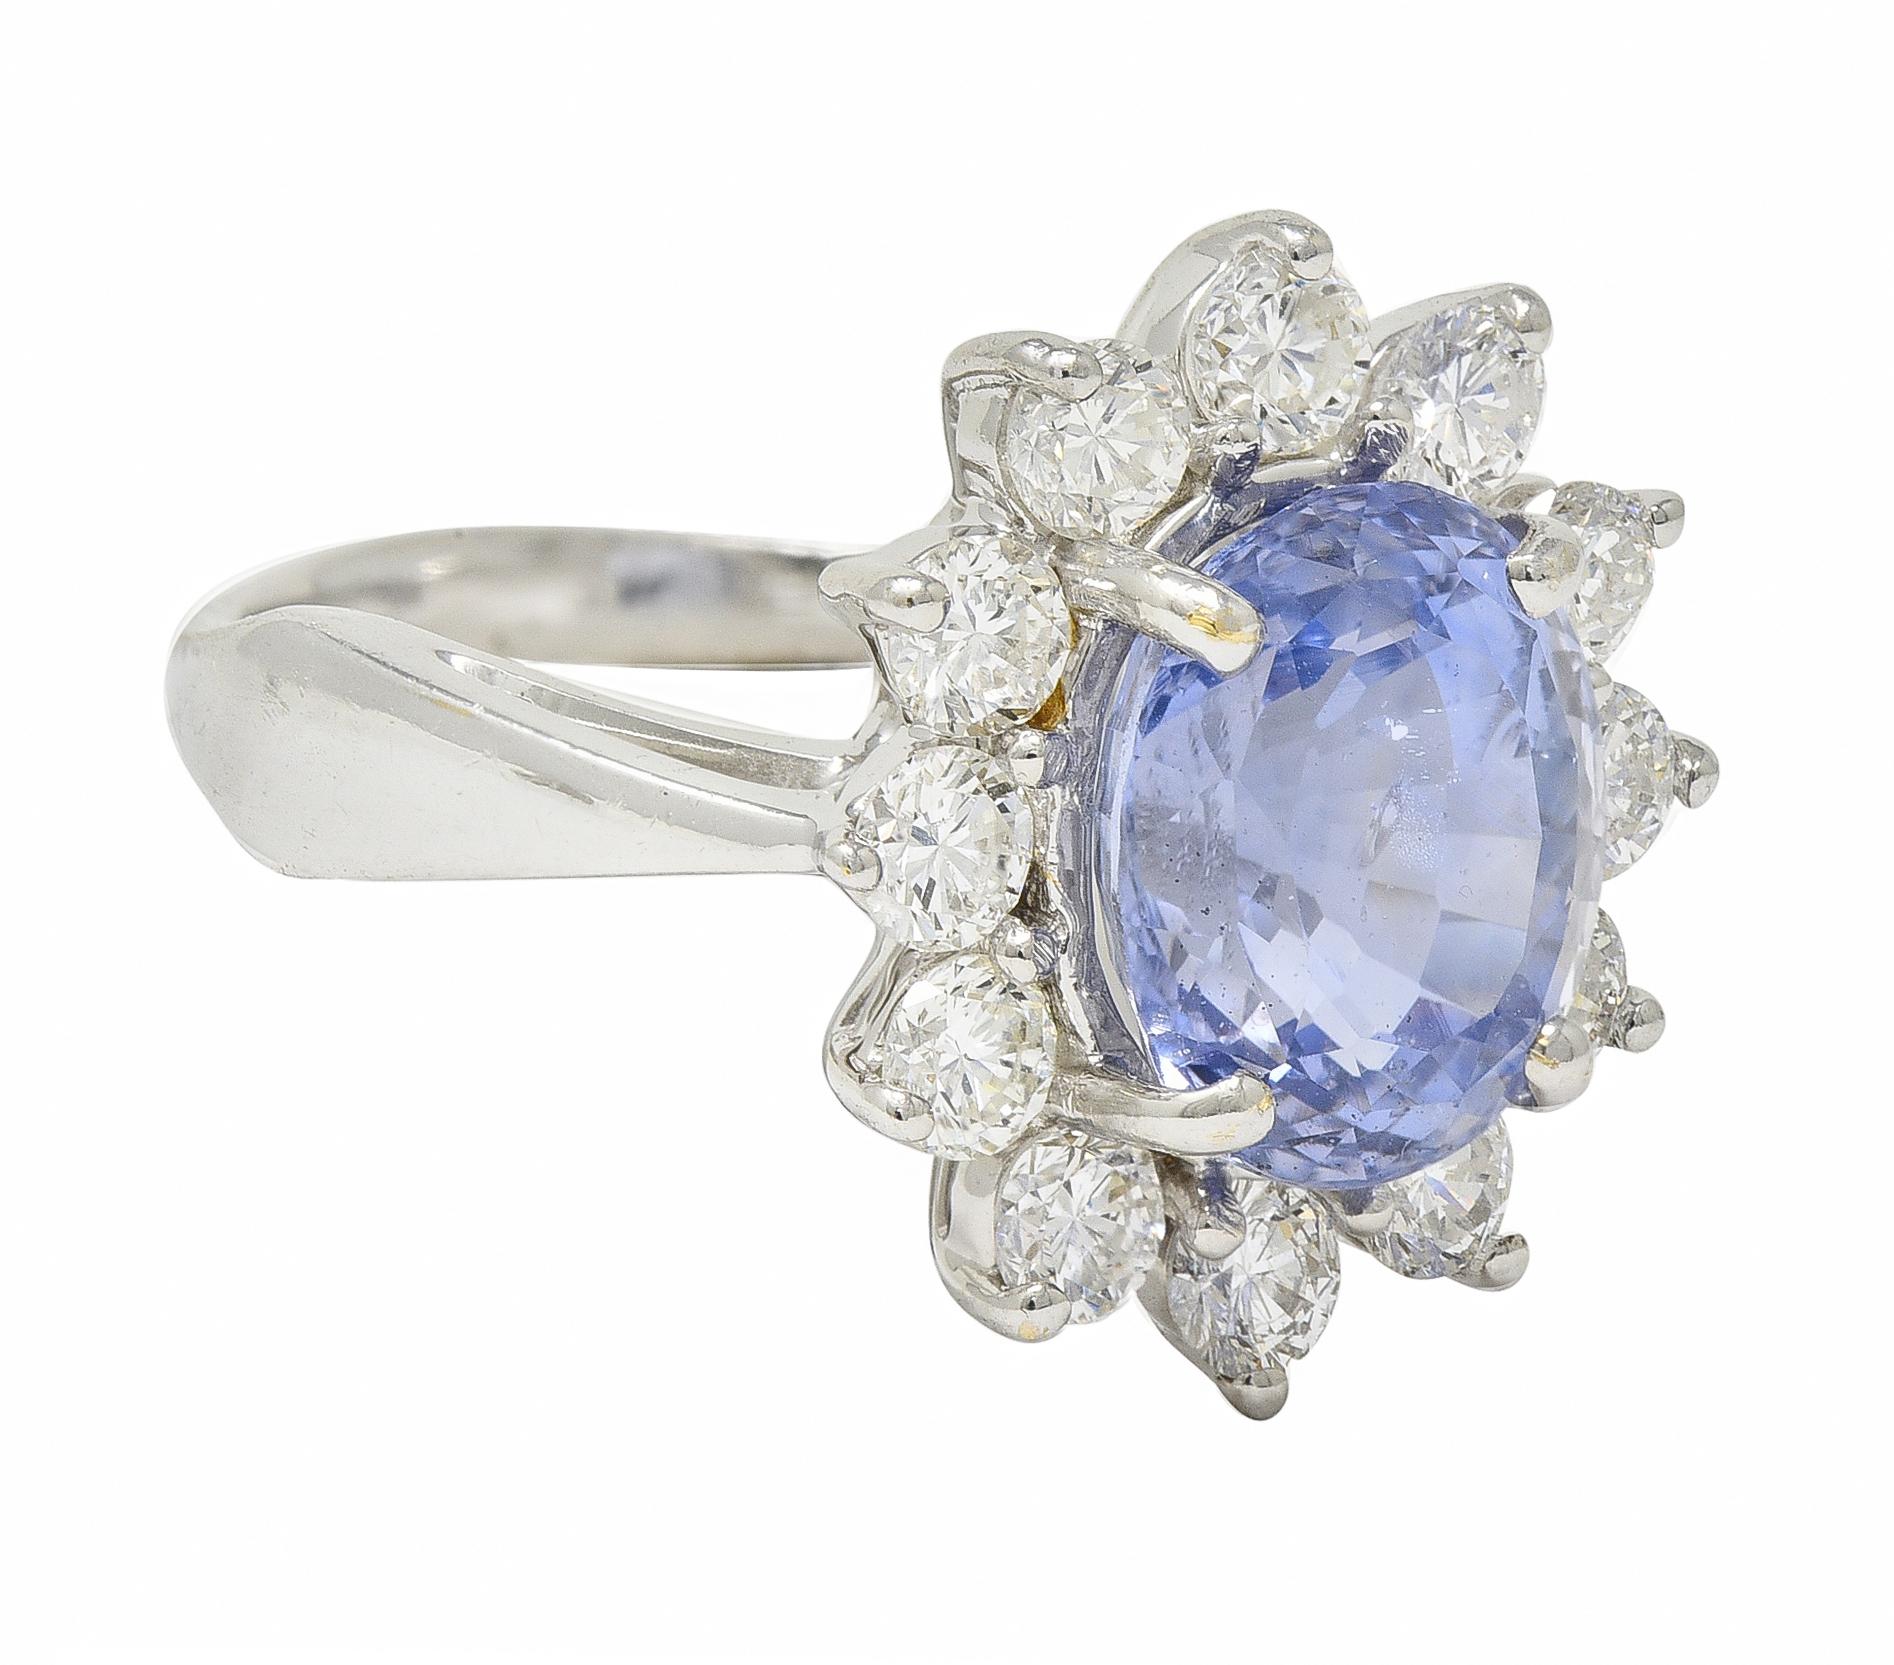 Centering an oval step cut sapphire weighing approximately 3.79 carats total 
Natural with no indications of heat treatment - transparent light blue
Prong set with a halo surround of round brilliant cut diamonds
Weighing approximately 1.70 carats